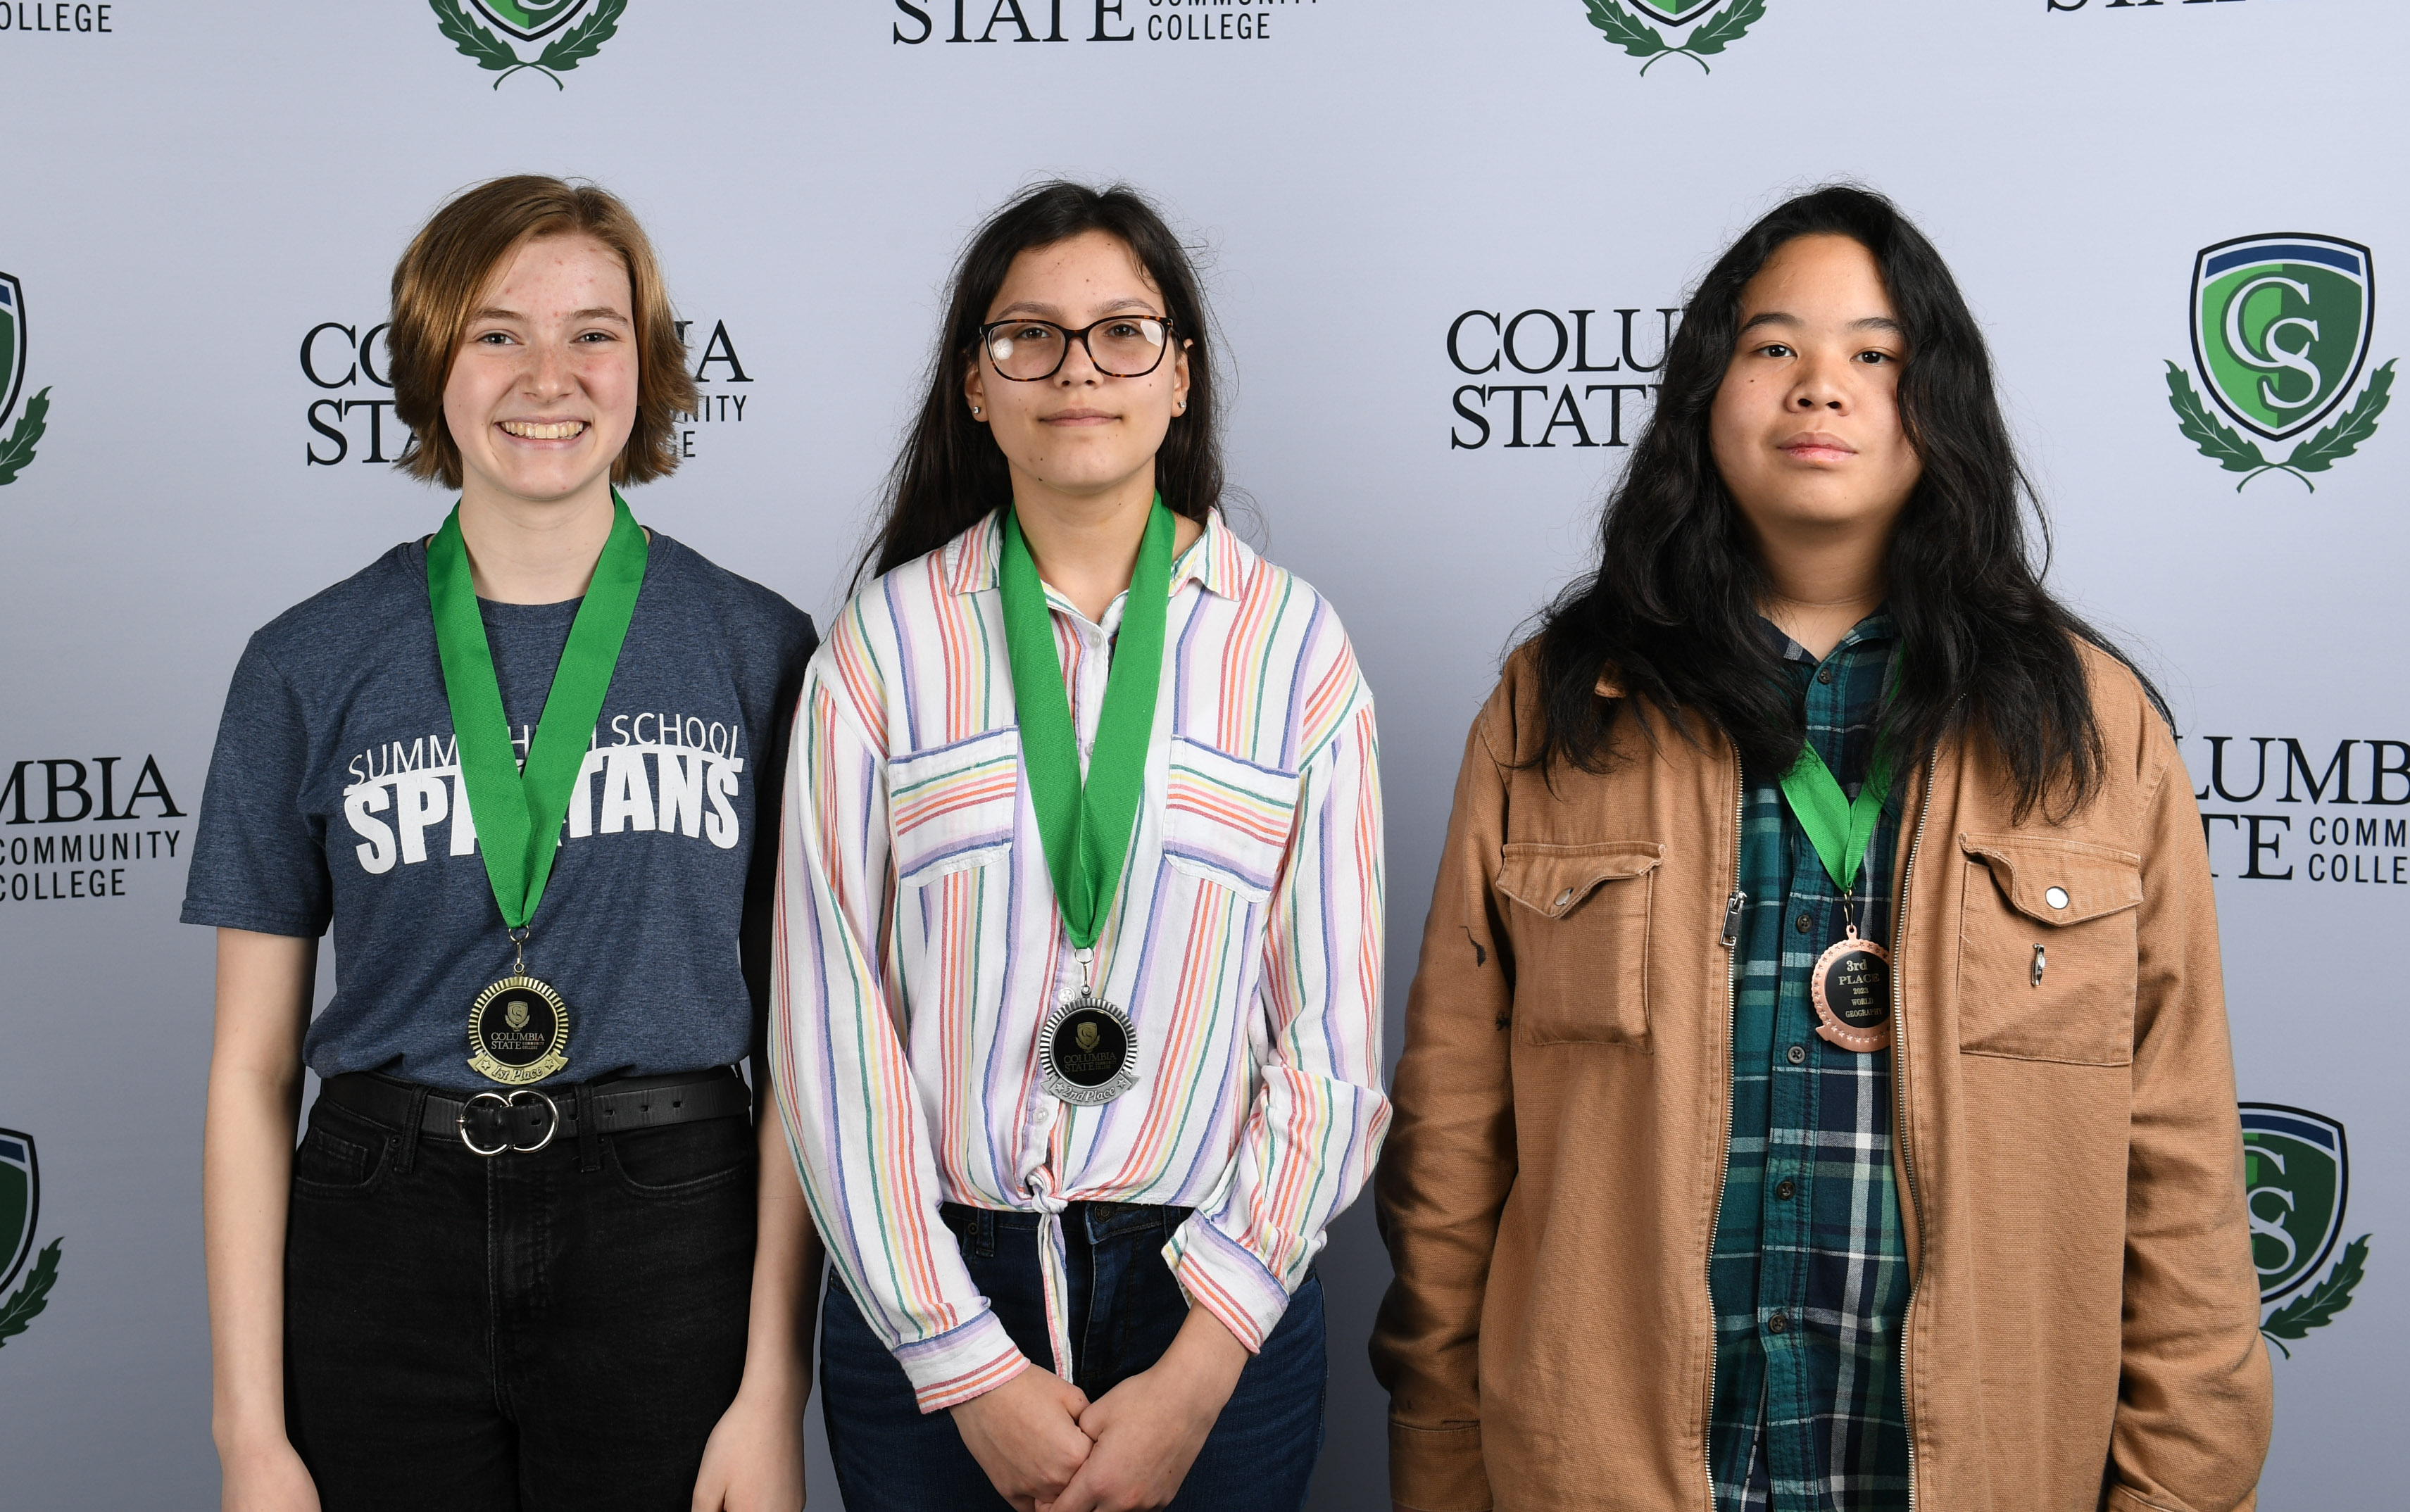 World Geography Winners (left to right): First place winner, Lauren Arnold of Summit High School; second place winner, Samantha Lopez of Summit High School; and third place winner, Kendrew Conder of Spring Hill High School.